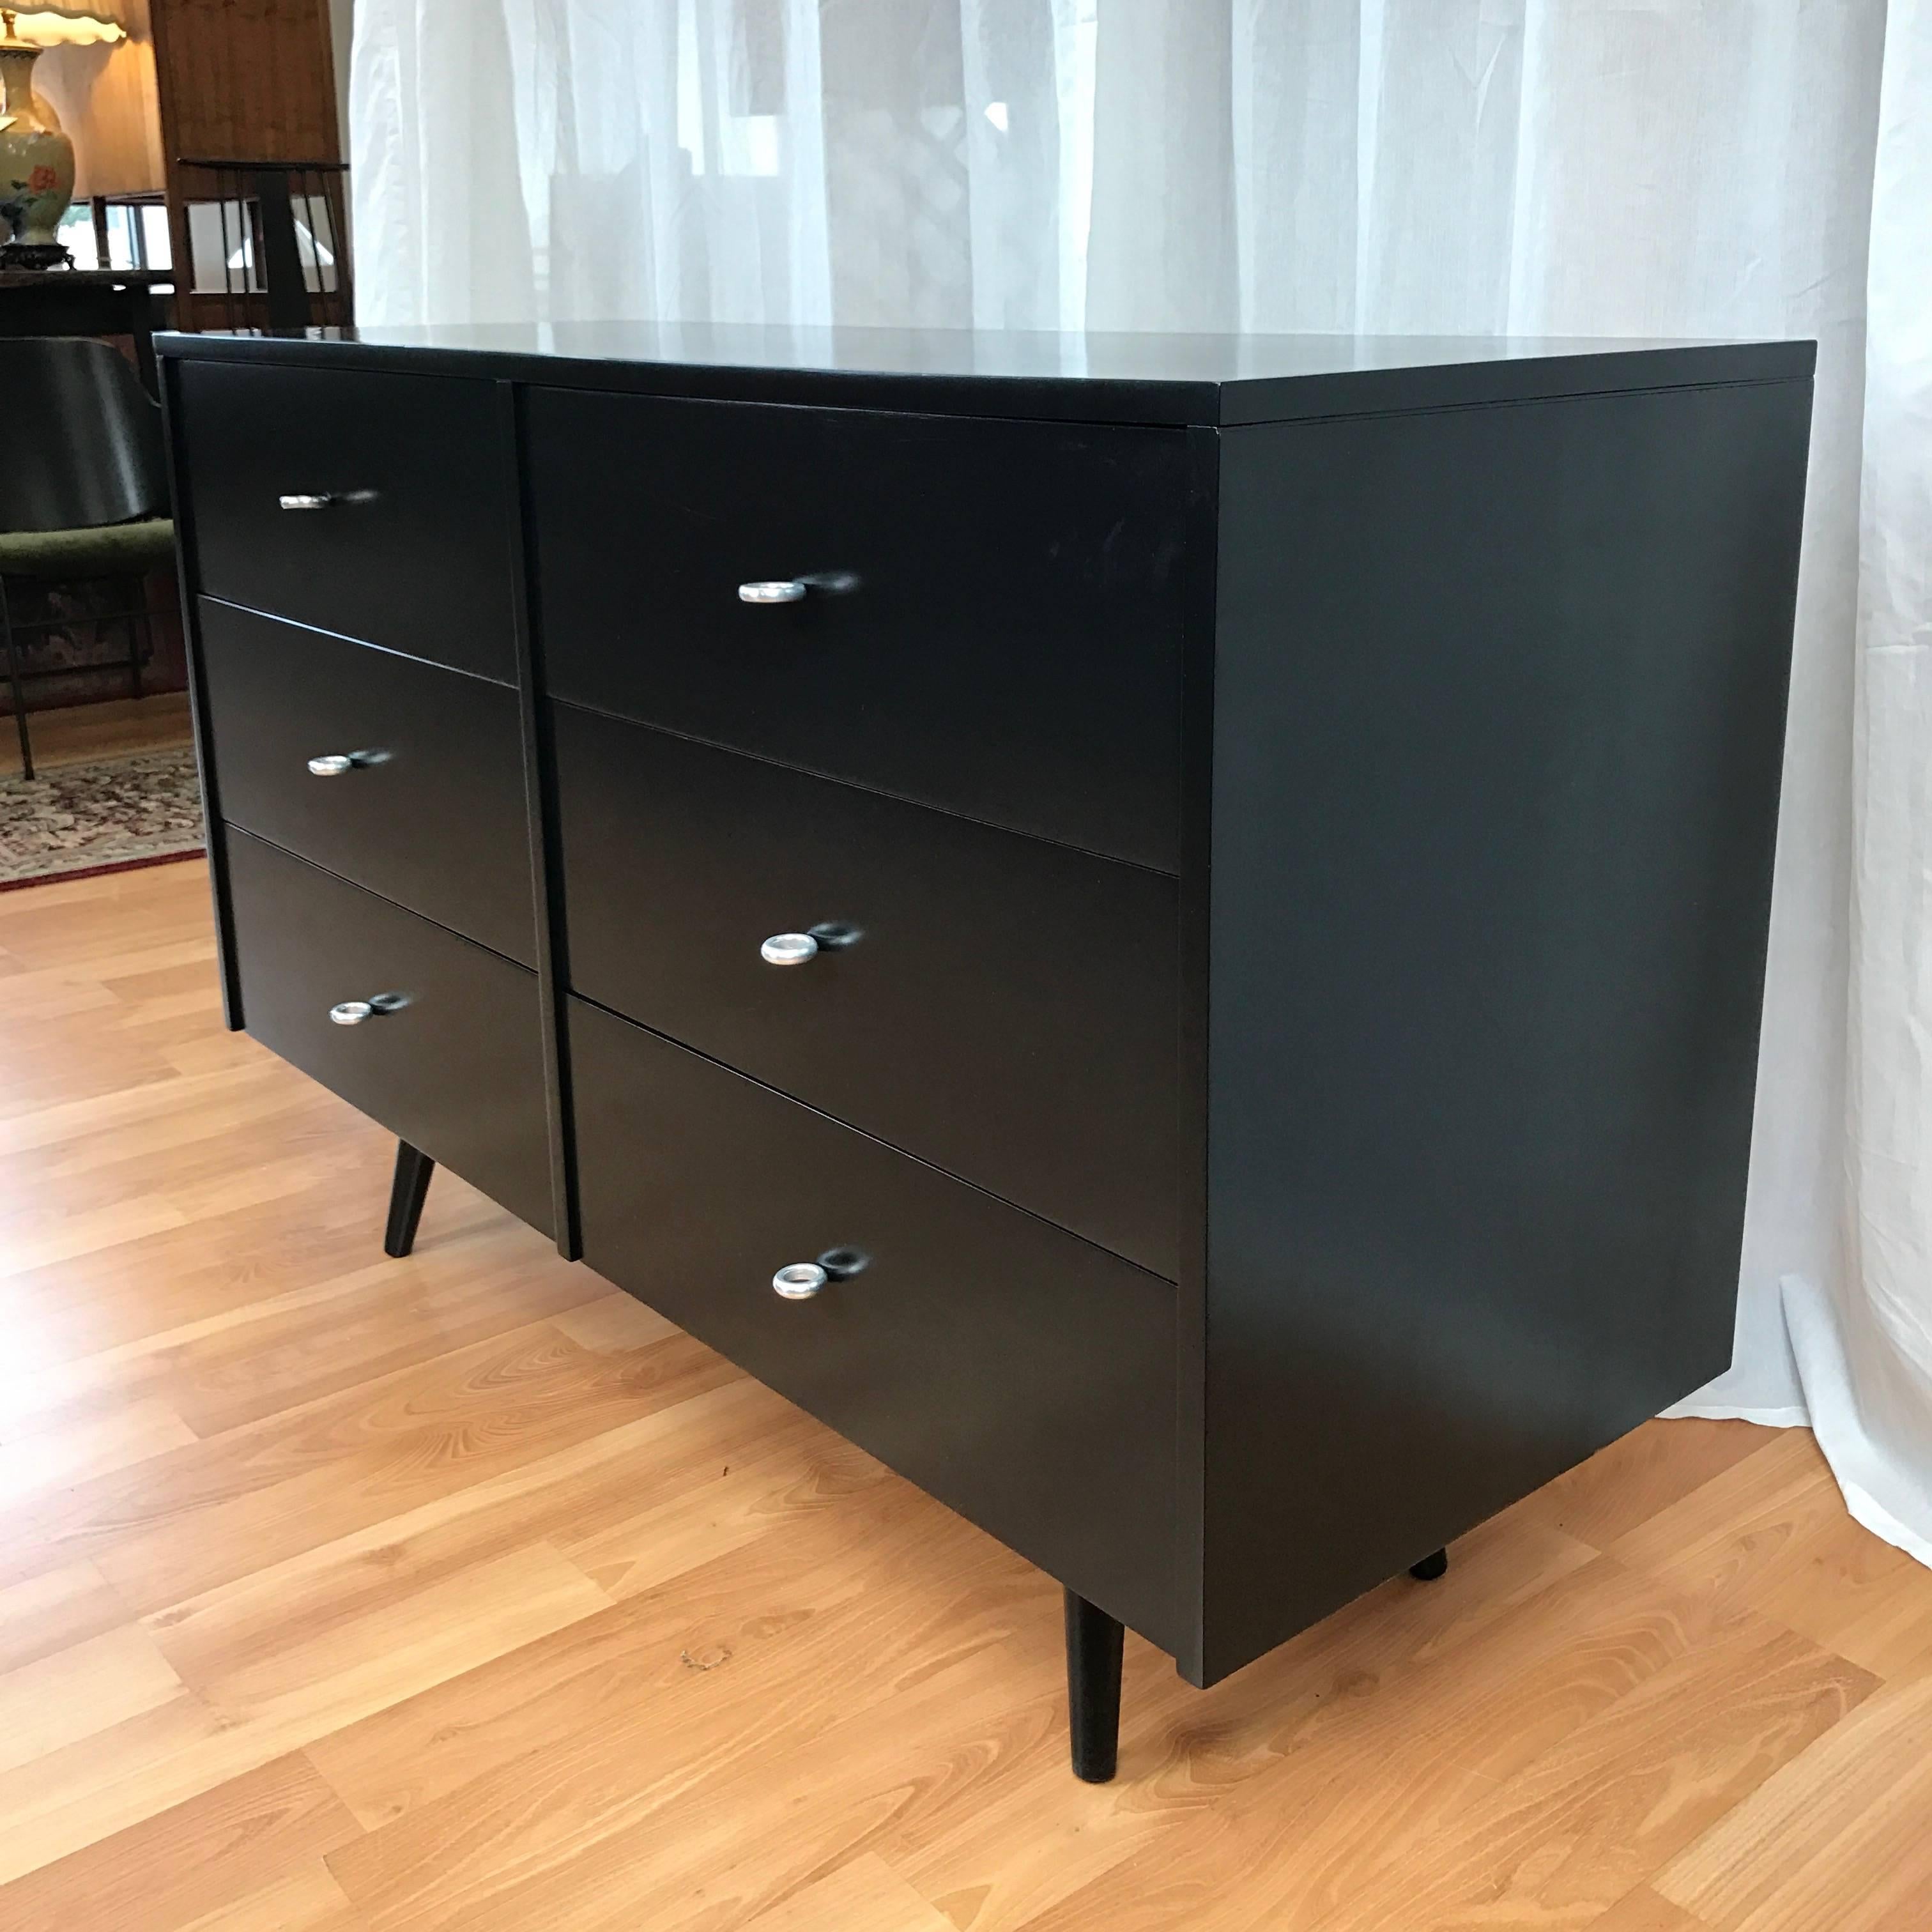 A “Planner Group” six-drawer dresser by Paul McCobb for Winchendon Furniture.

Maple dresser features satin black lacquer finish and retains its original aluminum ring pulls. Branded with maker’s mark on side of drawer. Fully restored and an